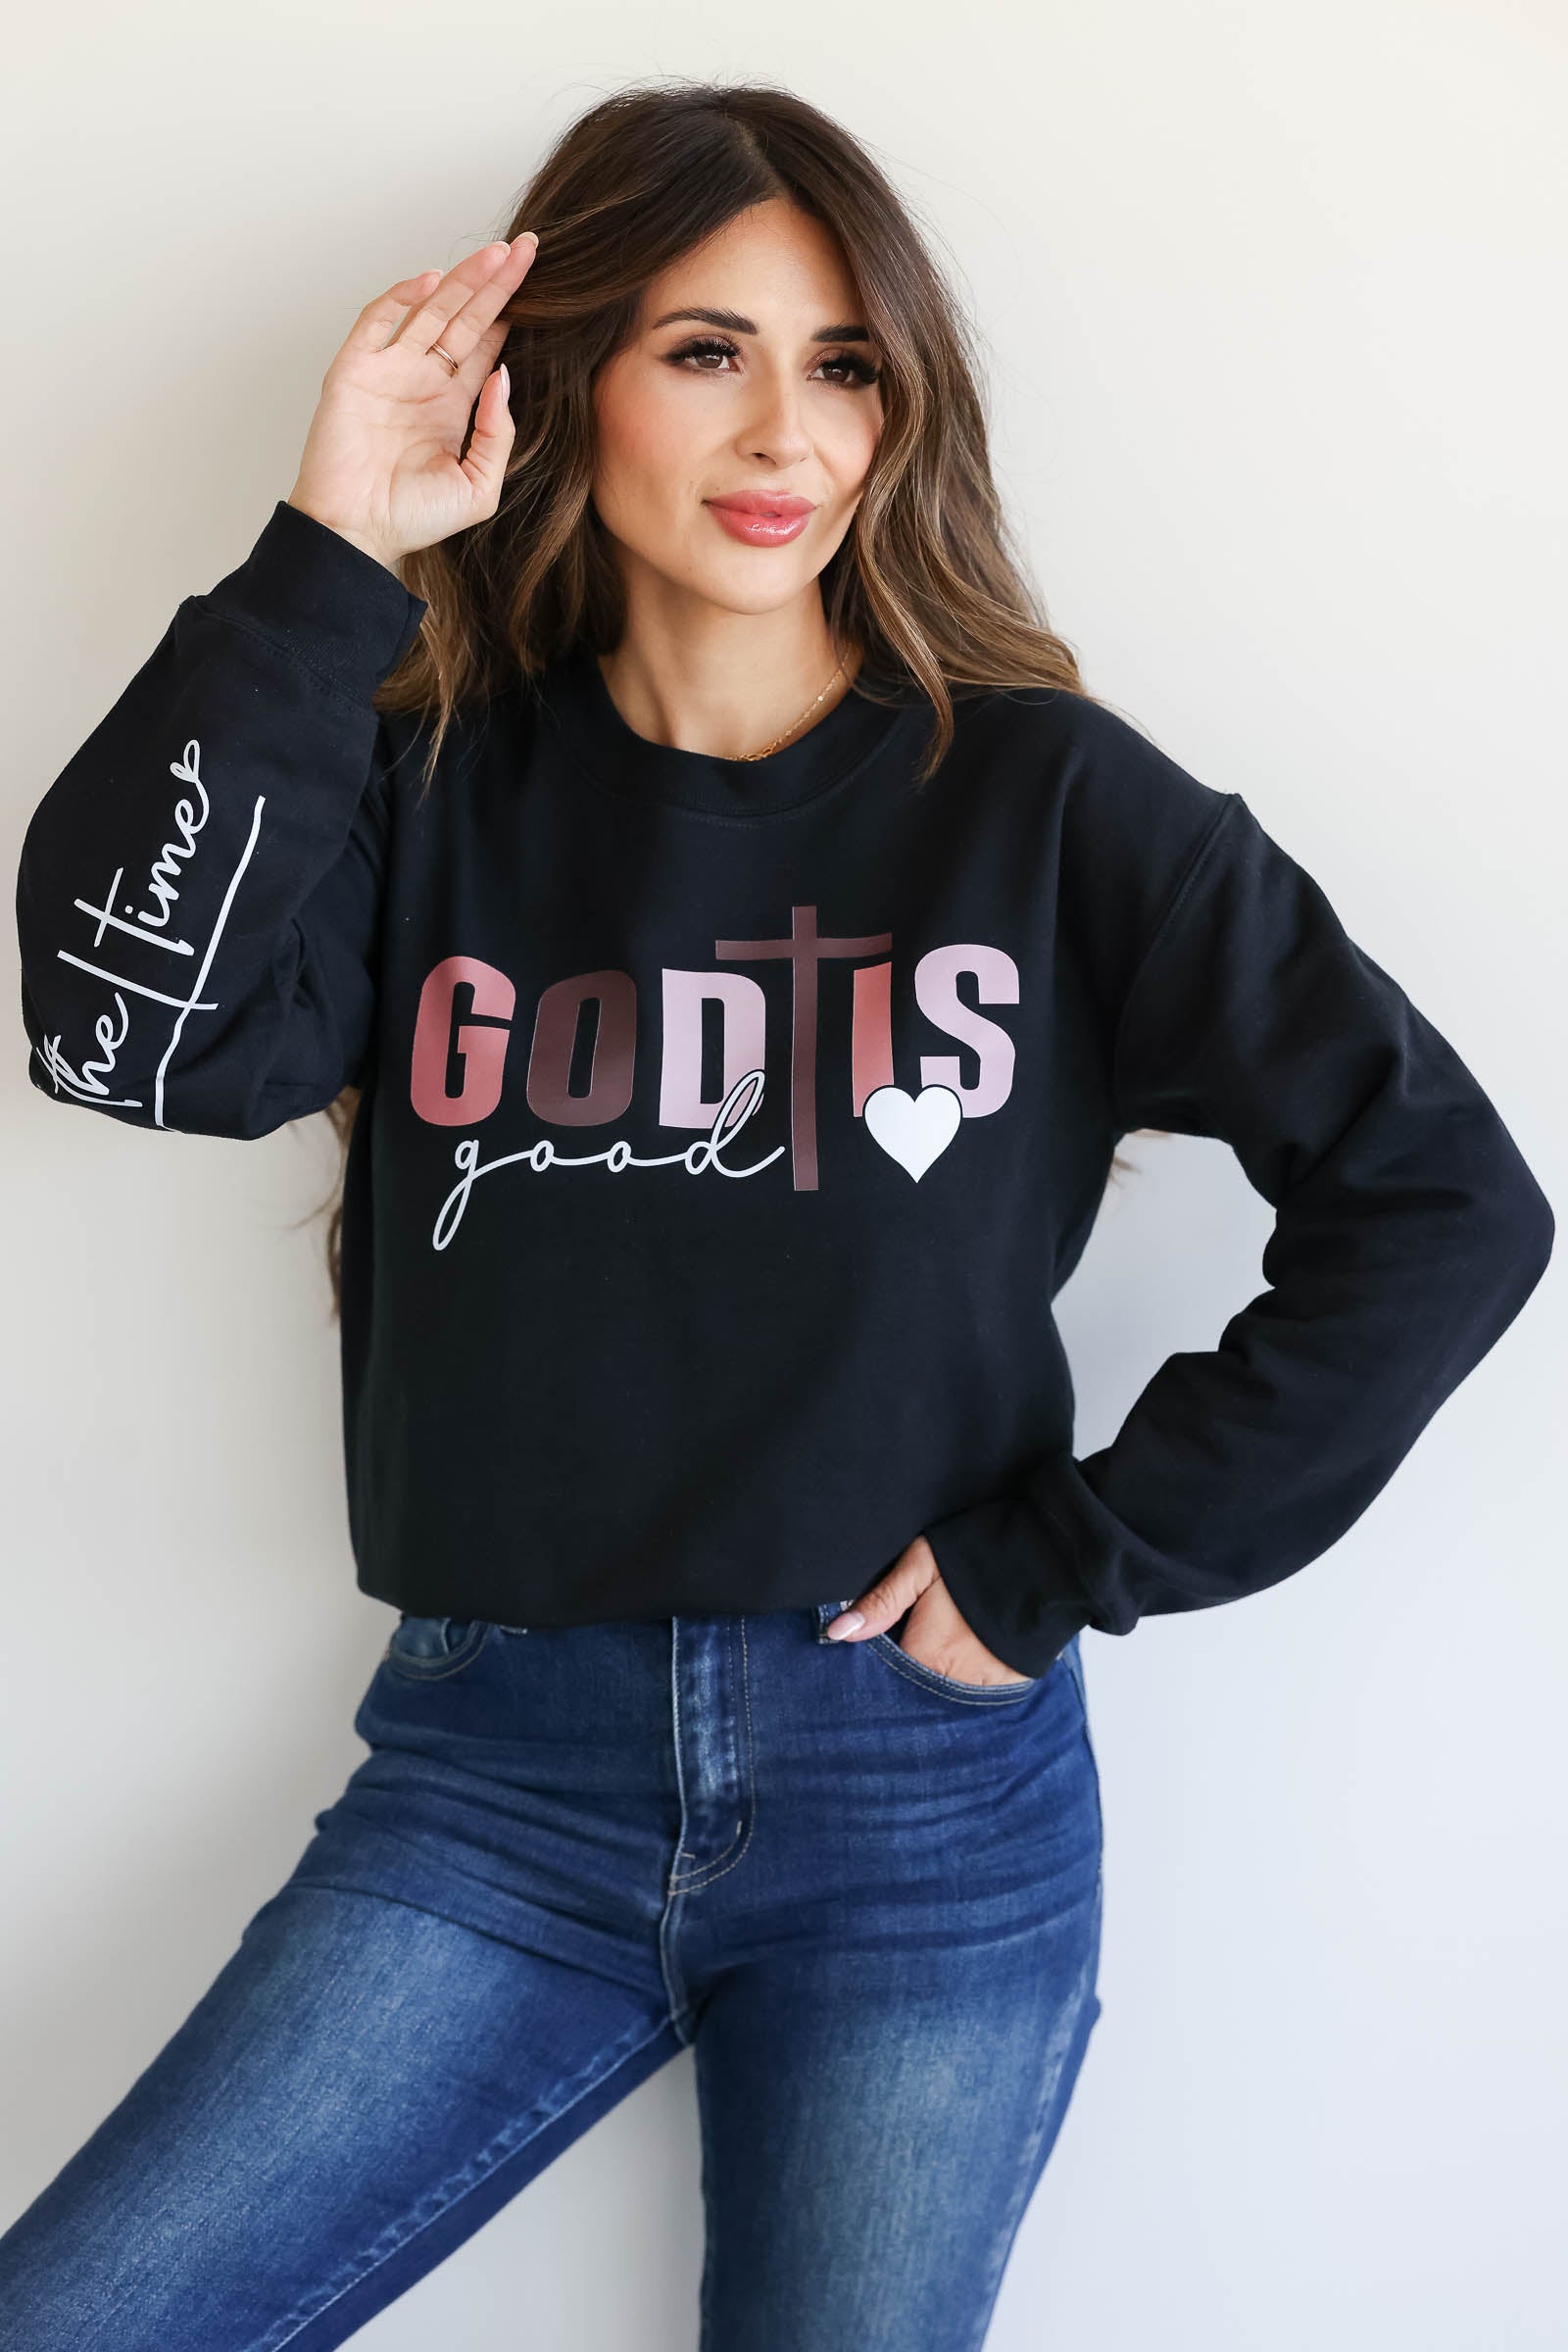 God Is Good All The Time Graphic Fleece Sweatshirts, Closet Candy 1